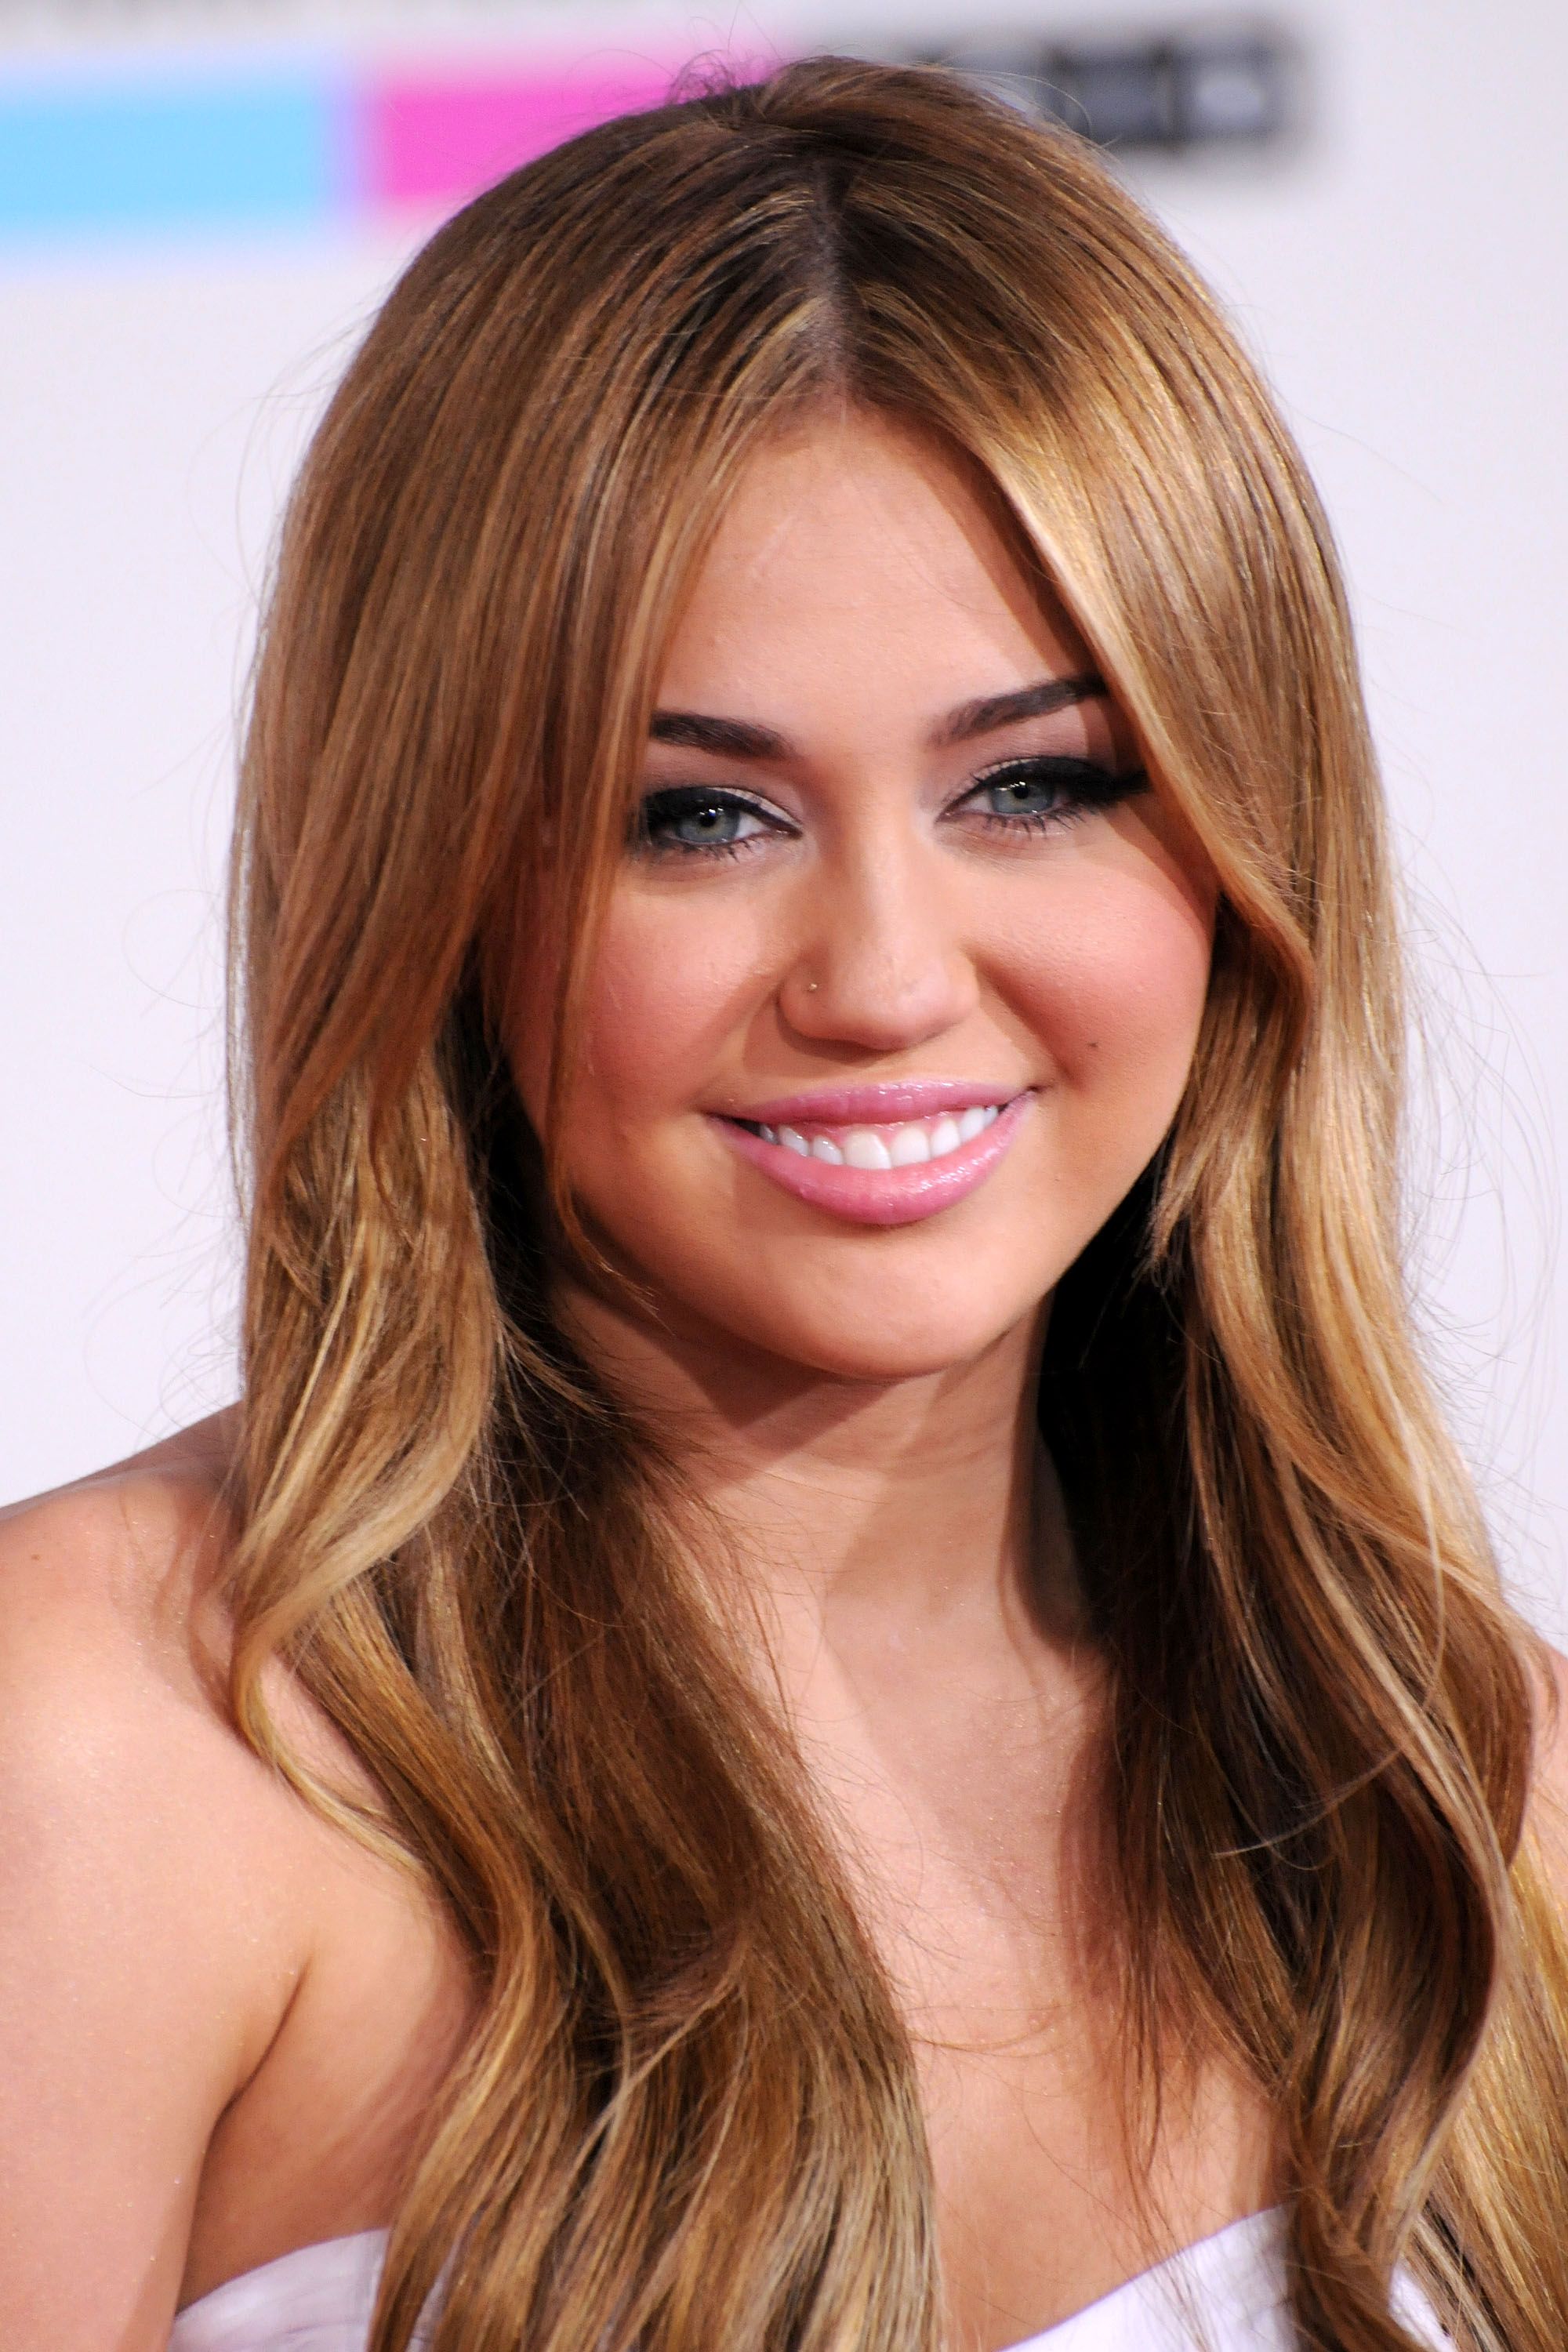 Miley Cyrus in American Music Awards: 2010 